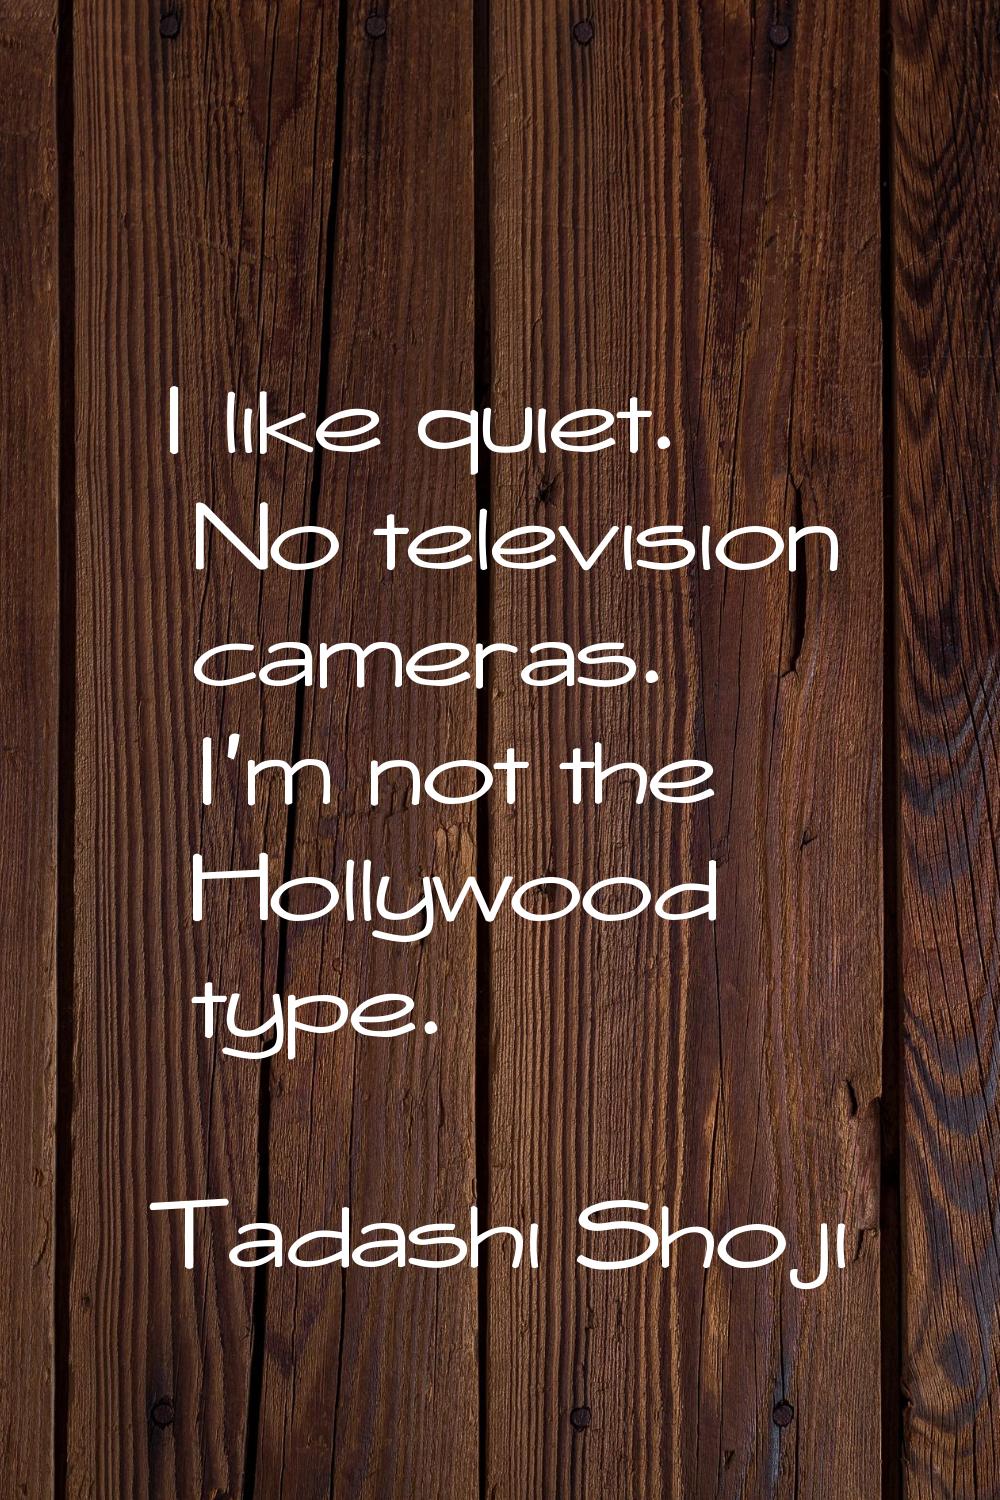 I like quiet. No television cameras. I'm not the Hollywood type.